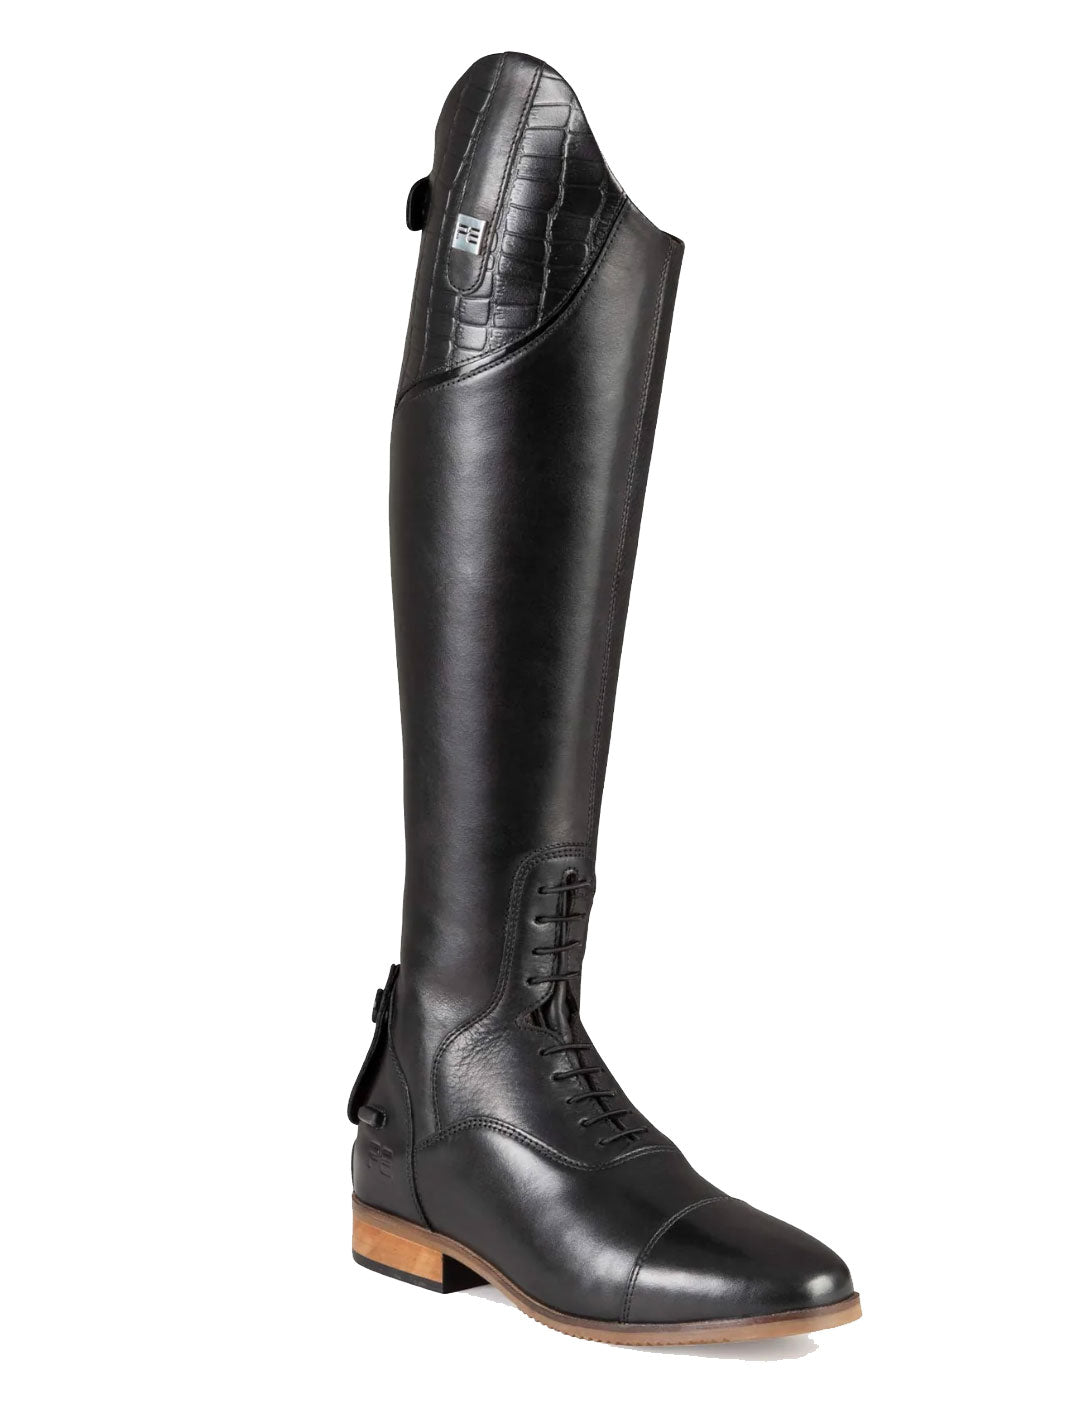 NEW! PE Passaggio Ladies Long Leather Field Tall Riding Boots Black ...